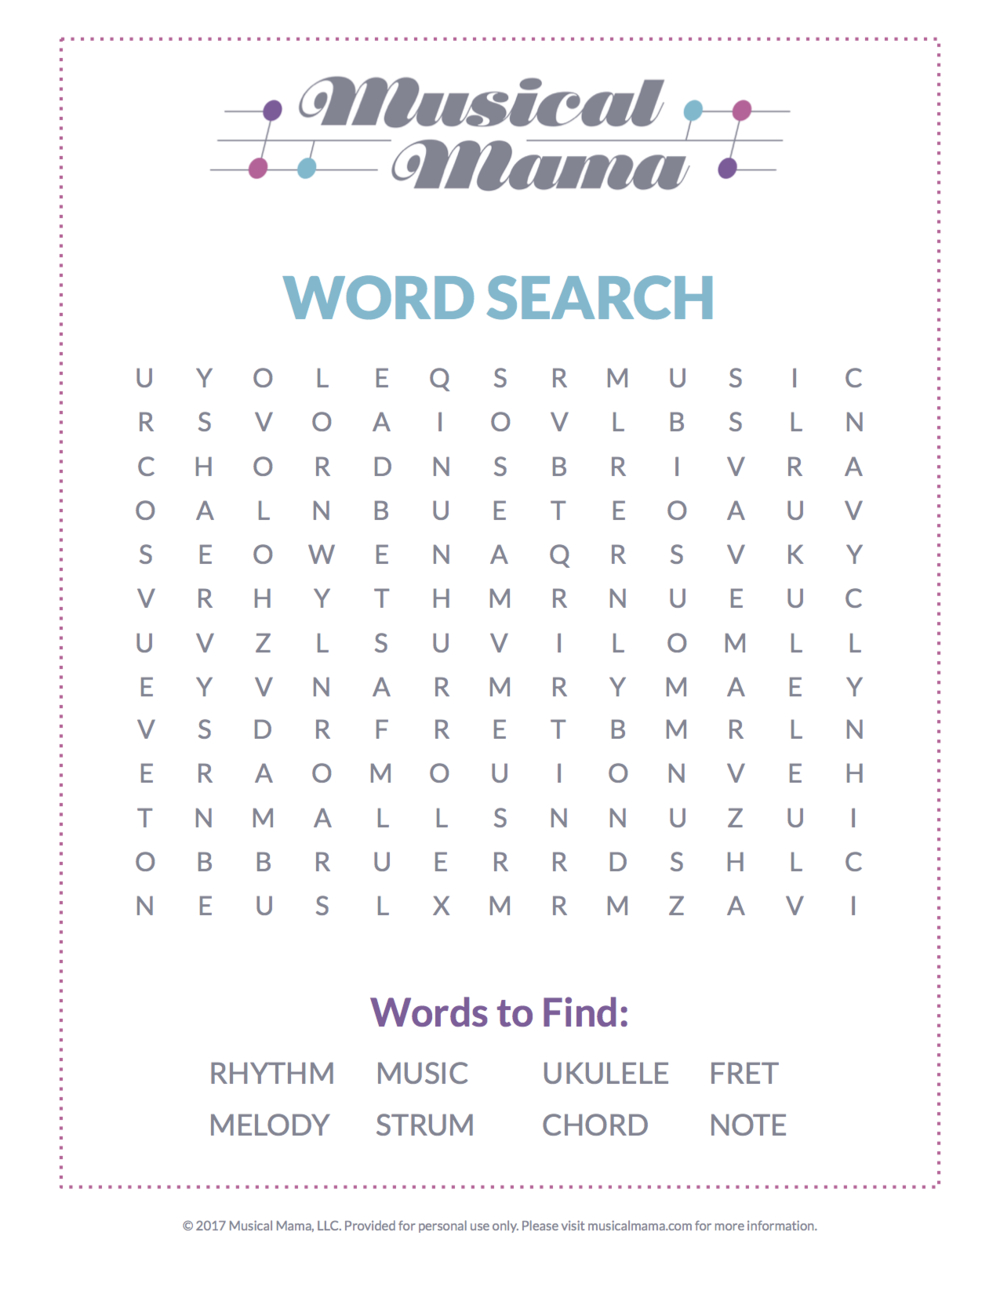 Free Printable: A Music-Themed Word Search — Musical Mama - Free Printable Music Word Searches